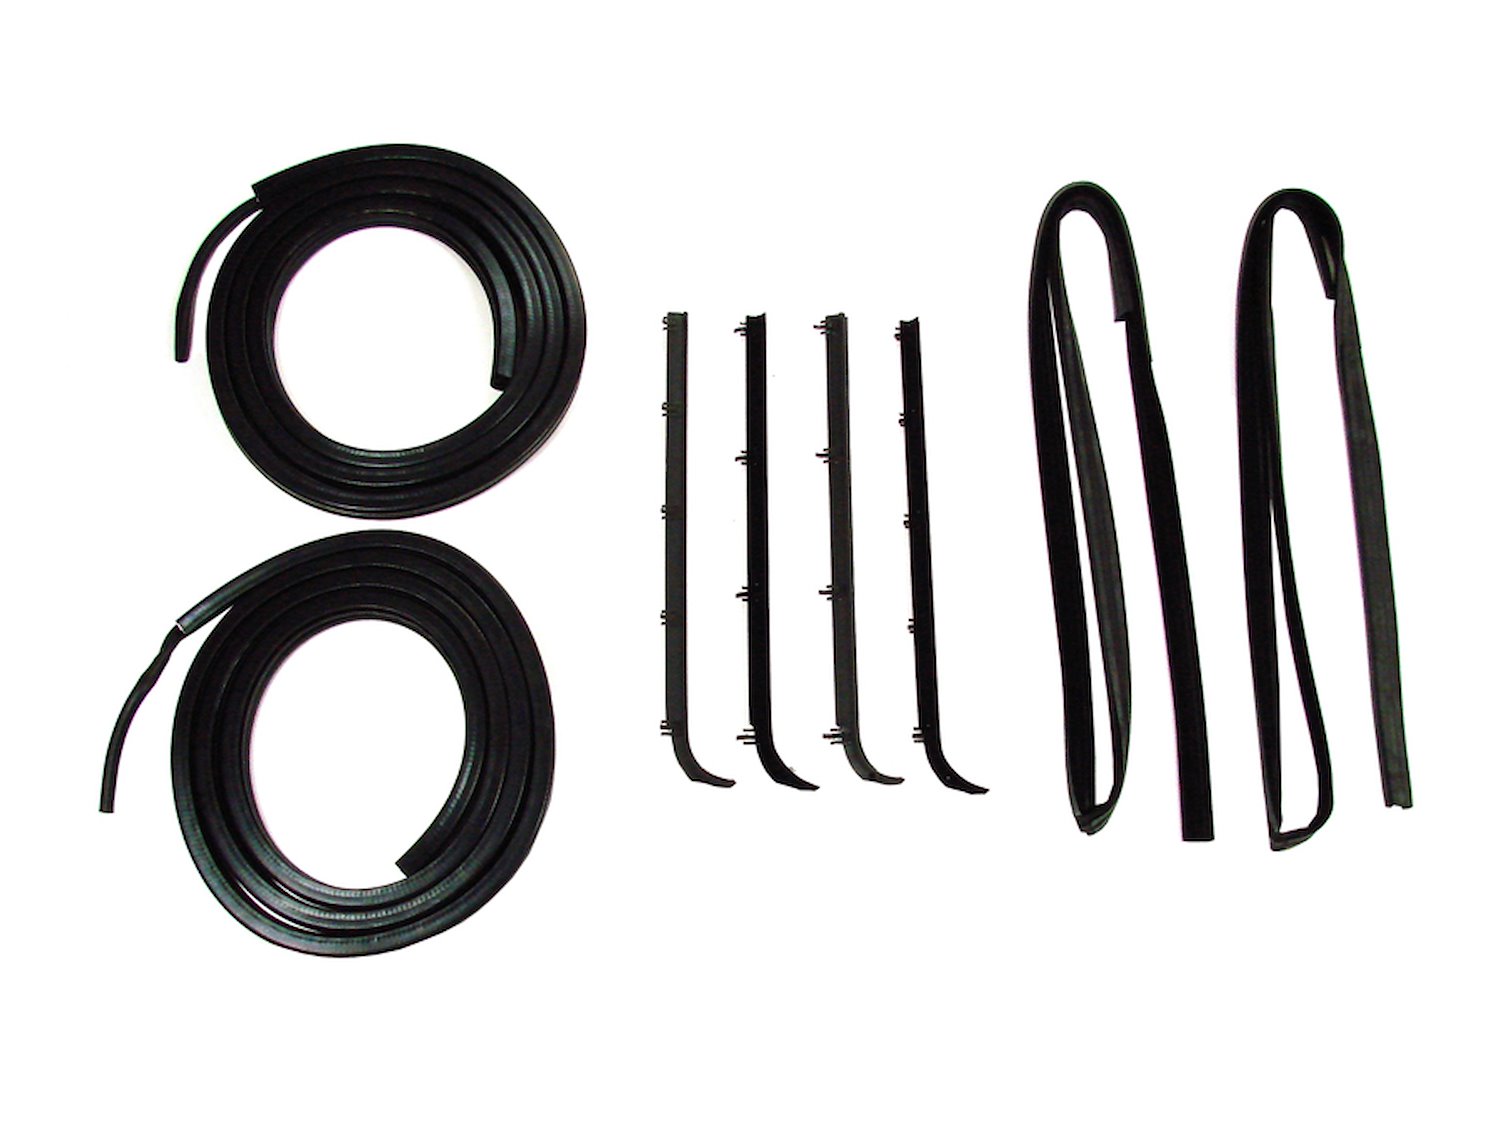 Door Weatherstrip Seal Kit for 1987-1998 Ford F-150, F-250/HD, F-350 Trucks [8-PC, Left & Right]